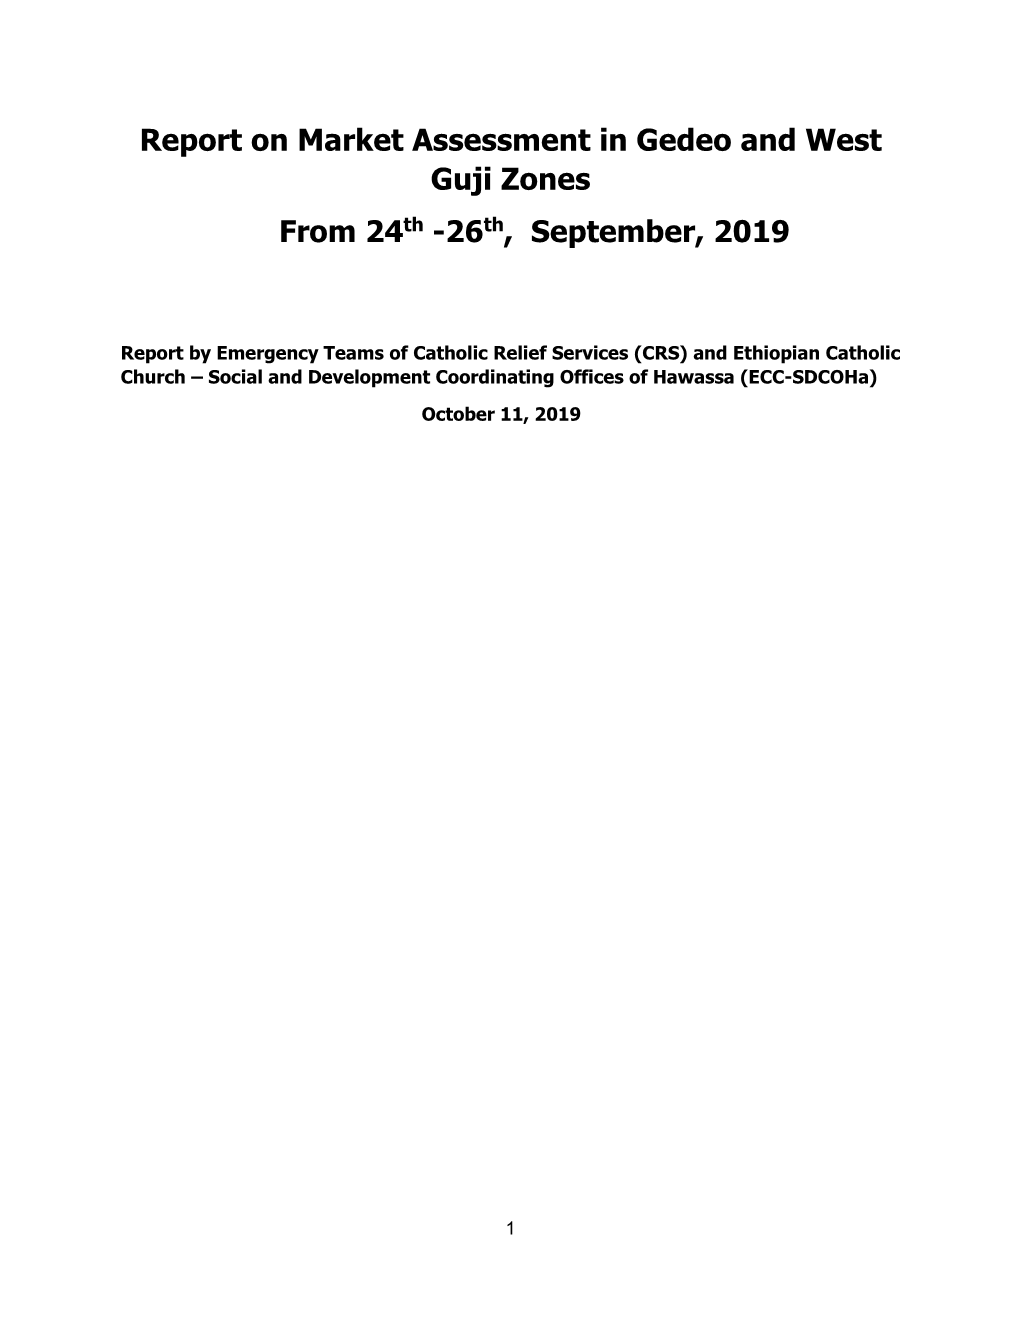 Report on Market Assessment in Gedeo and West Guji Zones from 24Th -26Th, September, 2019